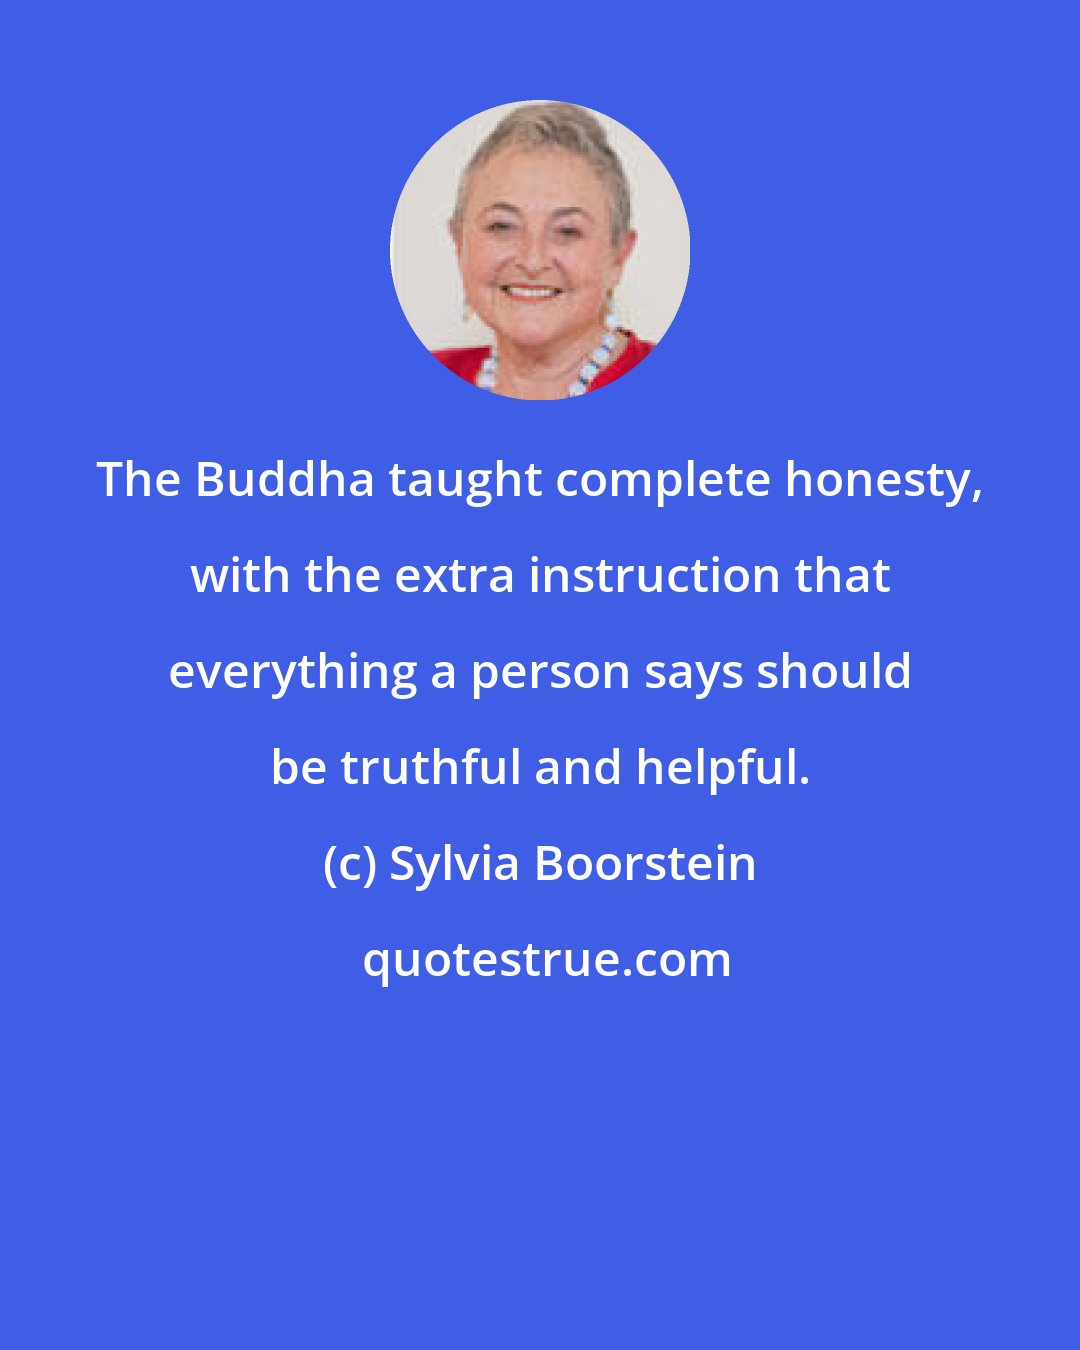 Sylvia Boorstein: The Buddha taught complete honesty, with the extra instruction that everything a person says should be truthful and helpful.